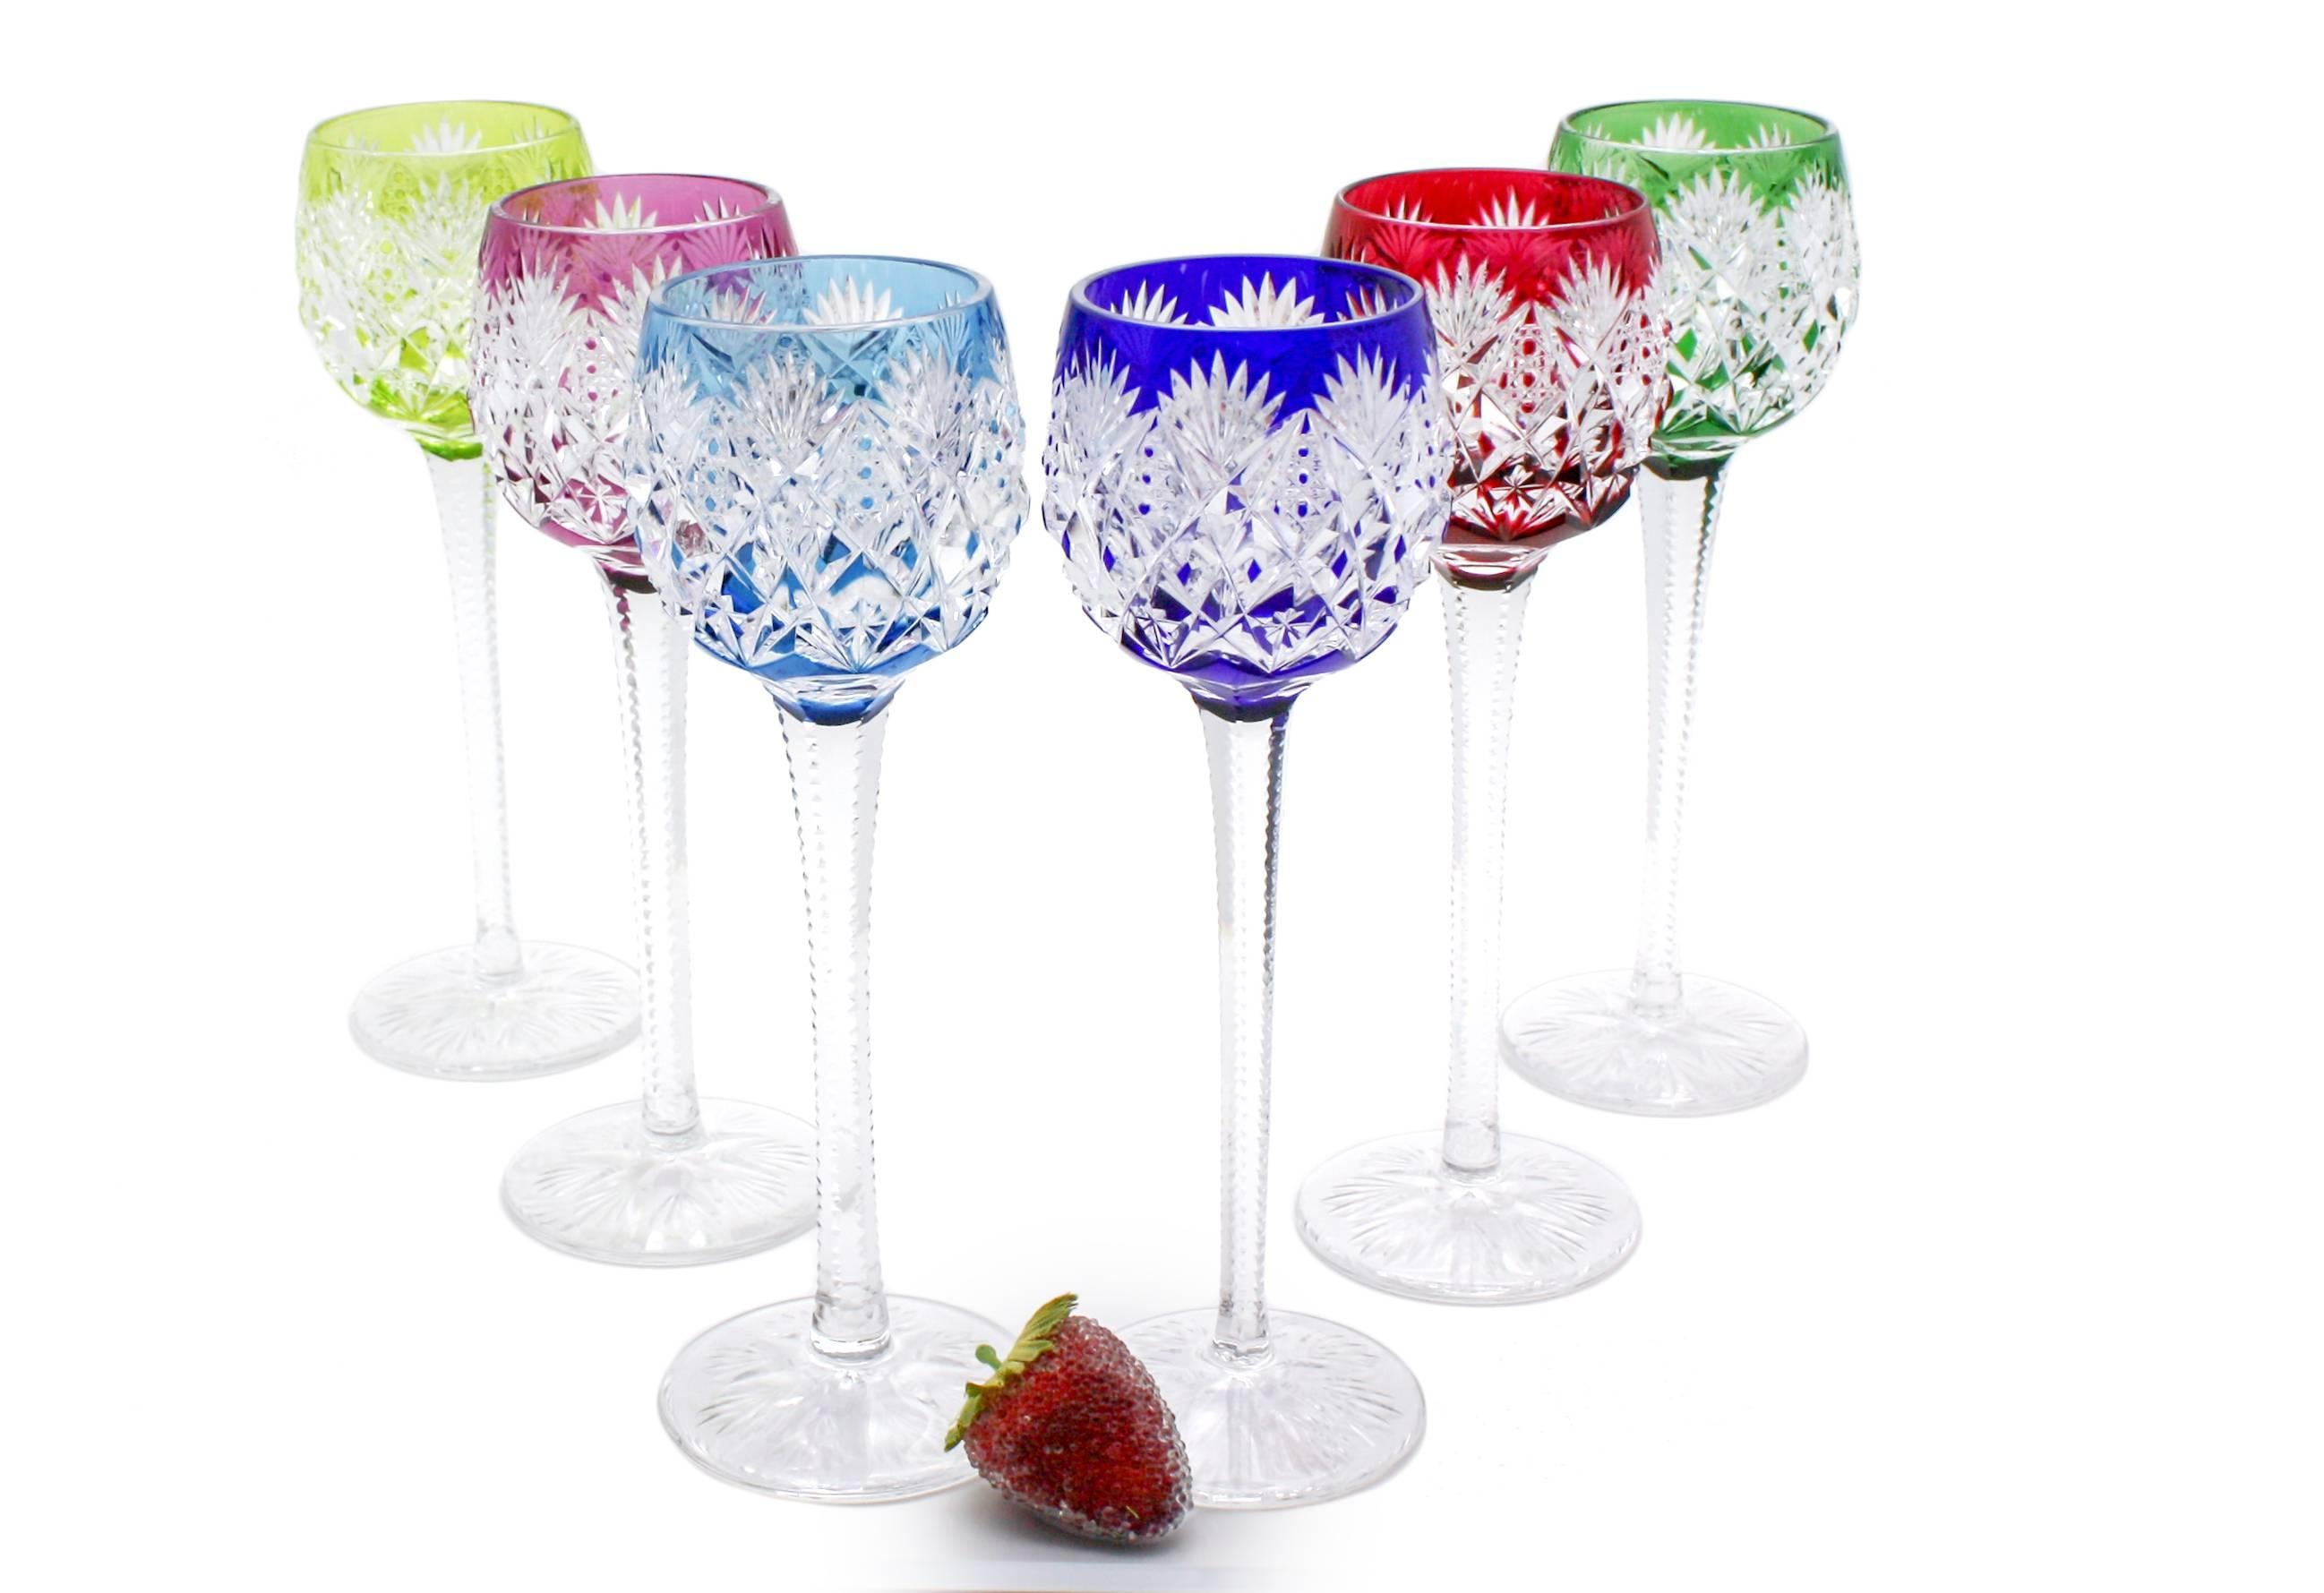 This rare set of 12 St. Louis handblown goblets is comprised of six sets of two each in a range of vibrant jewel-tone colors. Standing 9 1/2